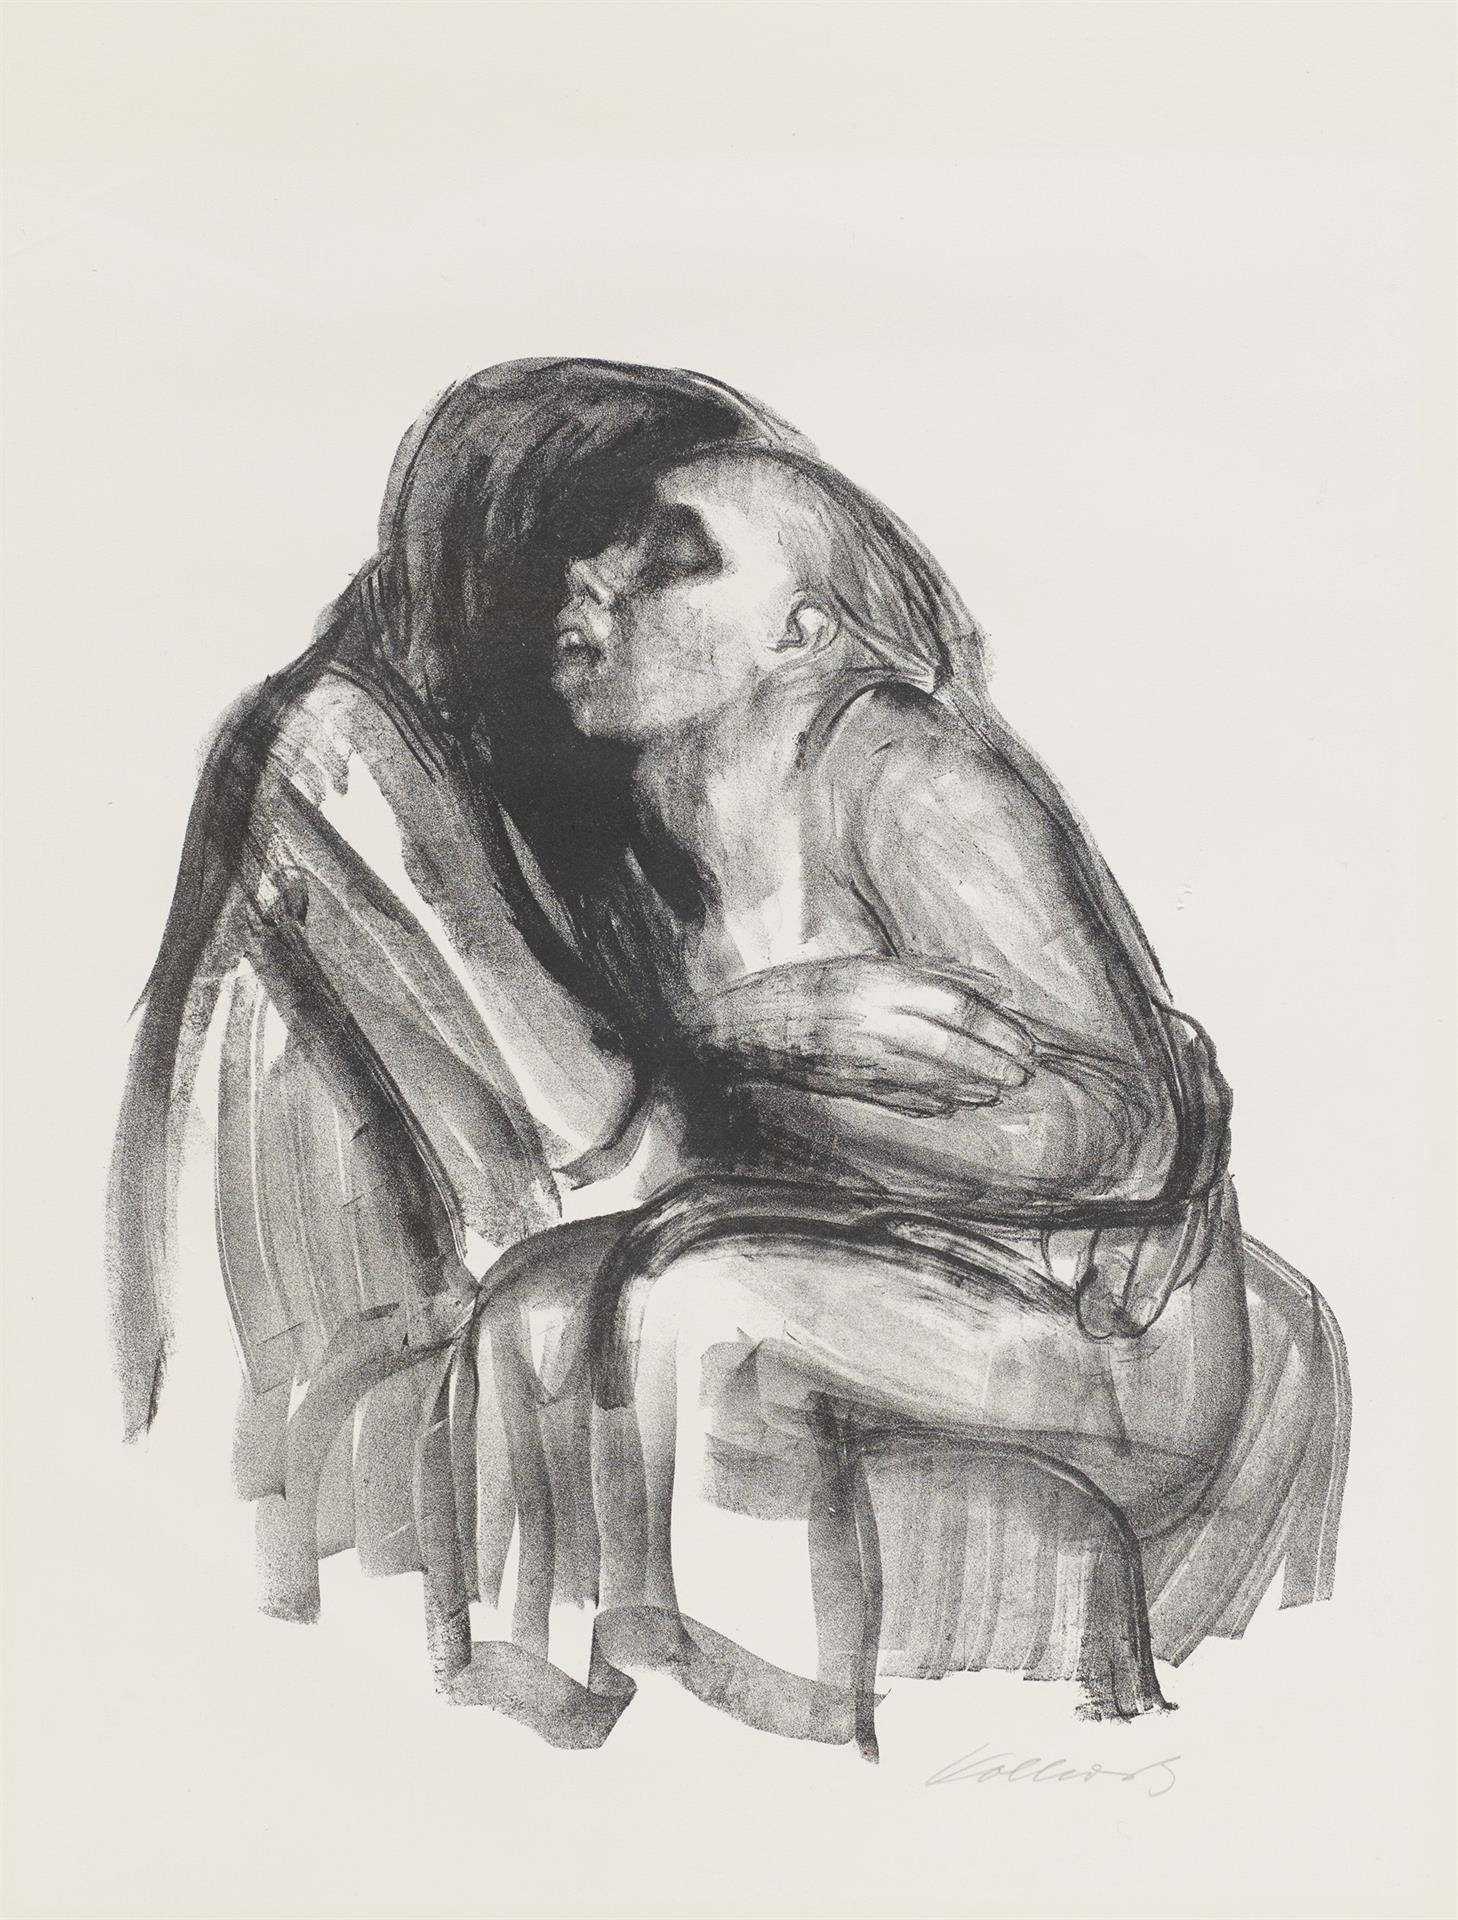 Käthe Kollwitz, Young Girl in the Lap of Death, sheet 2 of the series »Death«, 1934, crayon lithograph, Kn 265 b, Cologne Kollwitz Collection © Käthe Kollwitz Museum Köln